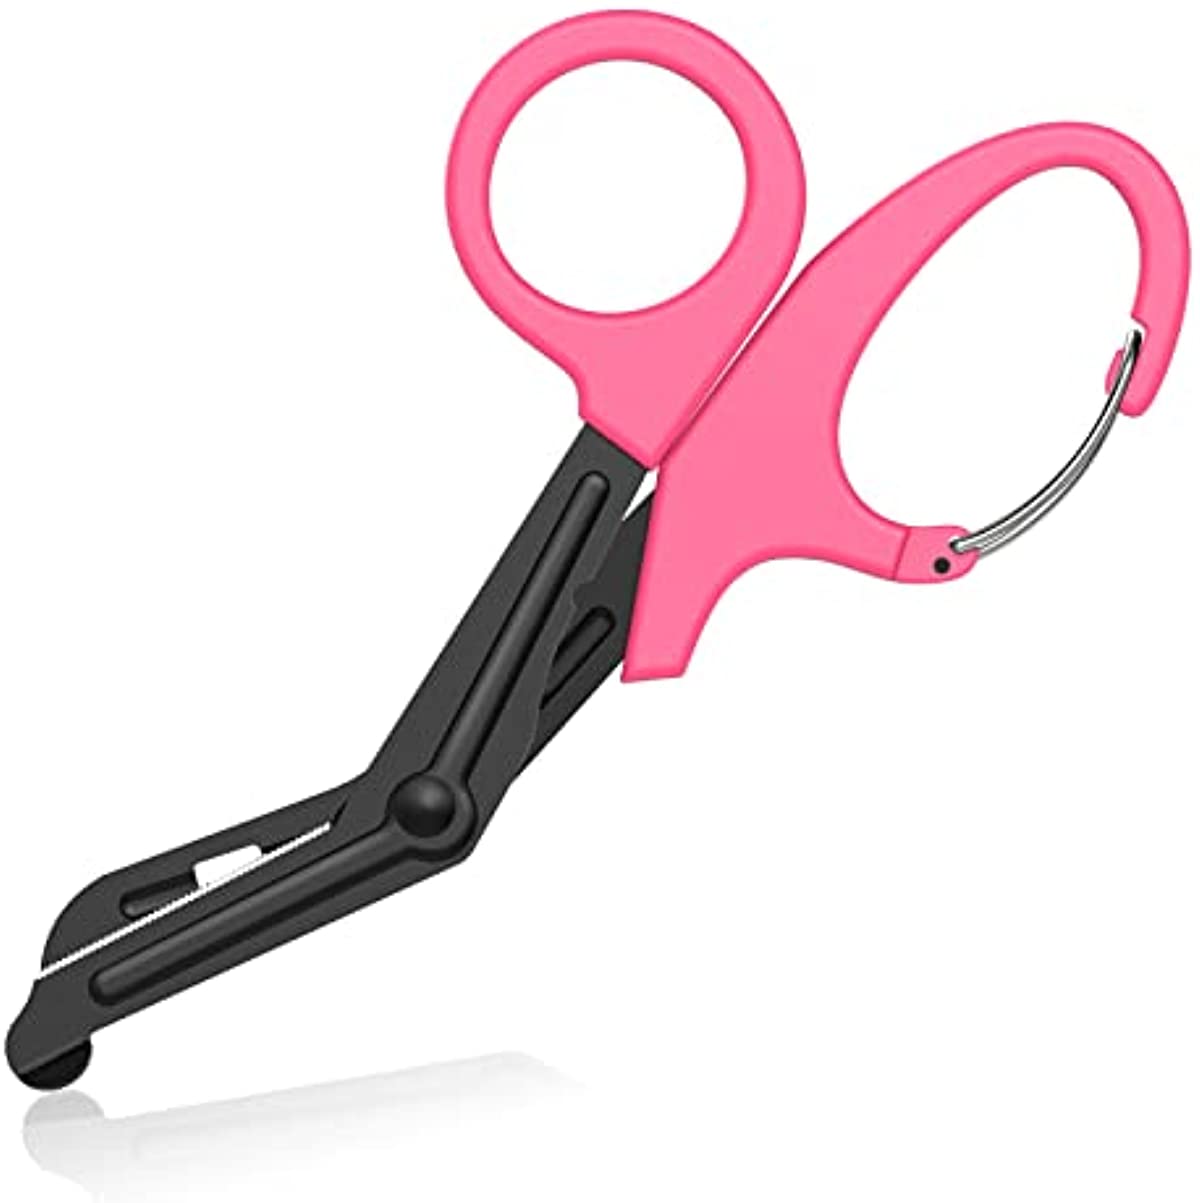 GRICARE Trauma Shears Medical Scissors with Carabiner, 7.5\" Bandage Nursing Scissors, Premium Fluoride-Coated Surgical Scissors for Nurses, Doctors, Nursing Students, First Aid, EMT and EMS Pink